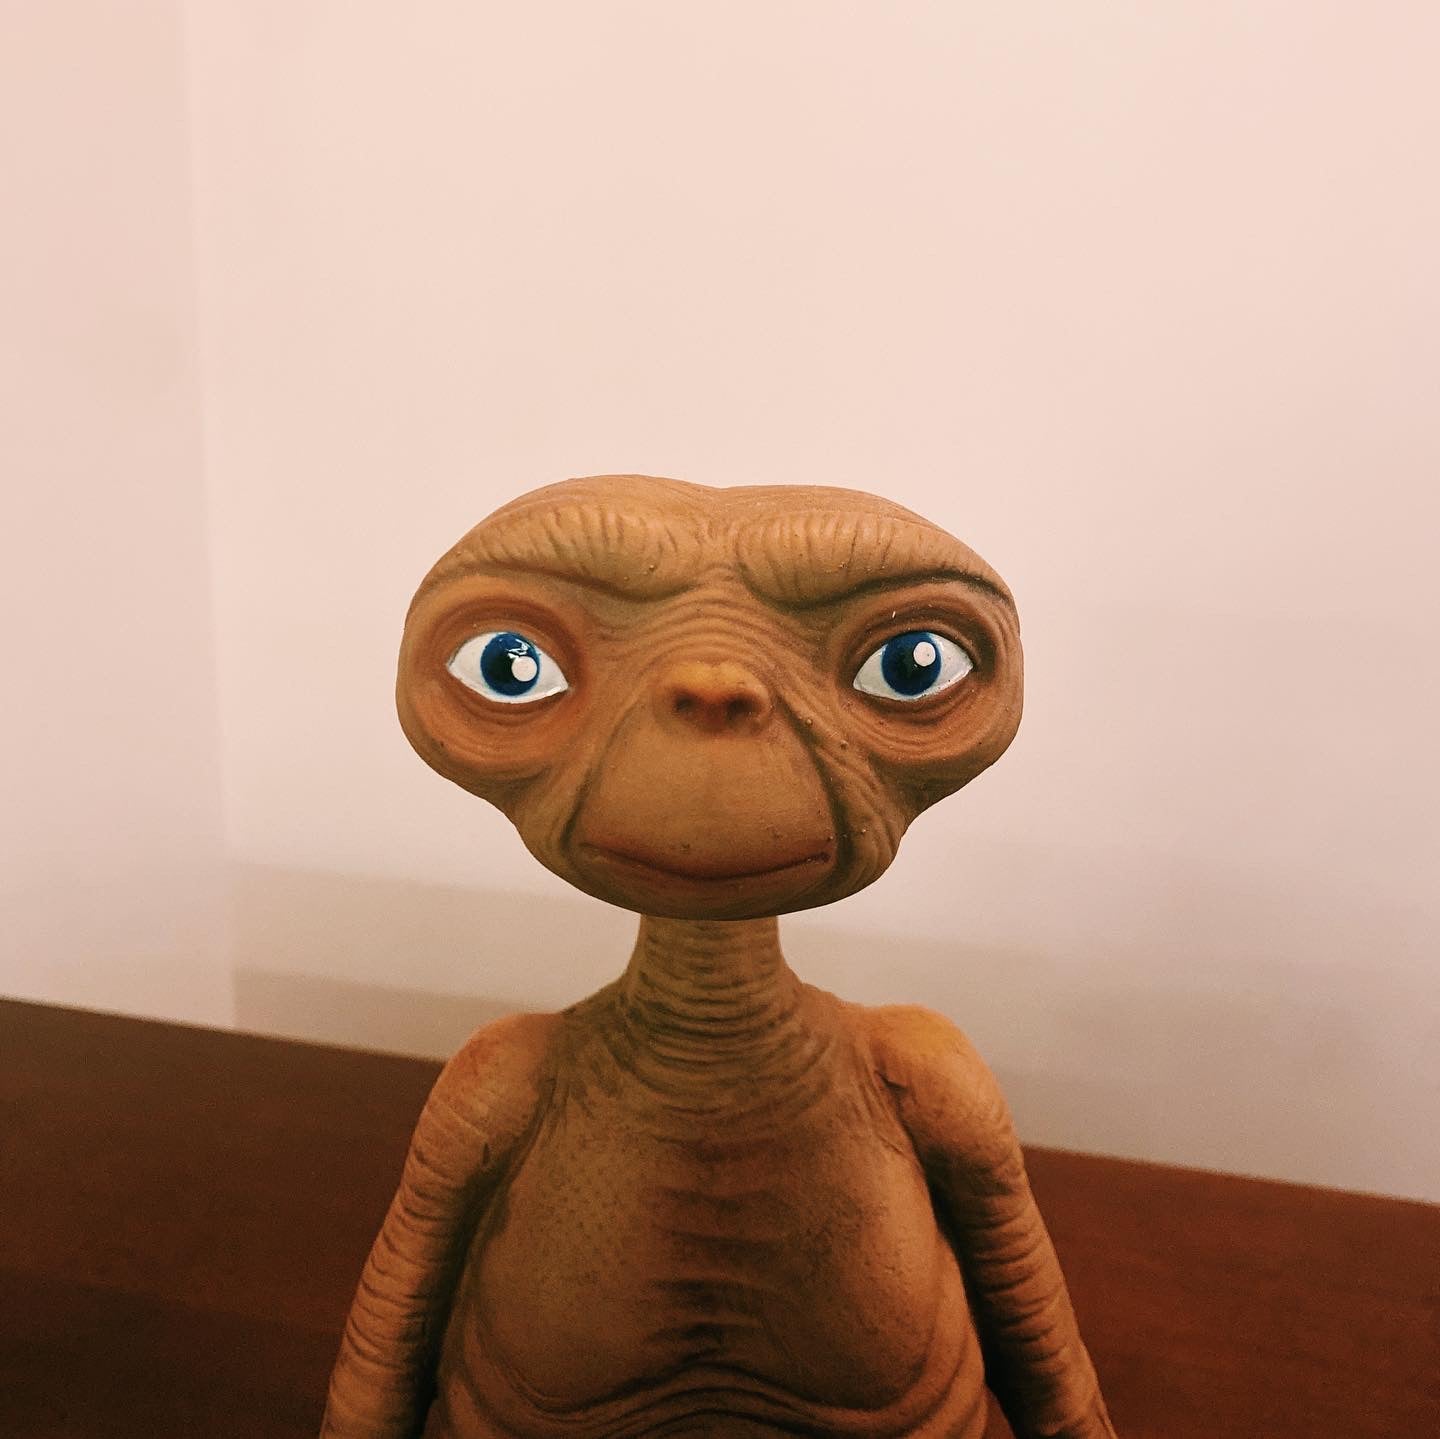 E.T. the Extra-Terrestrial 玩具